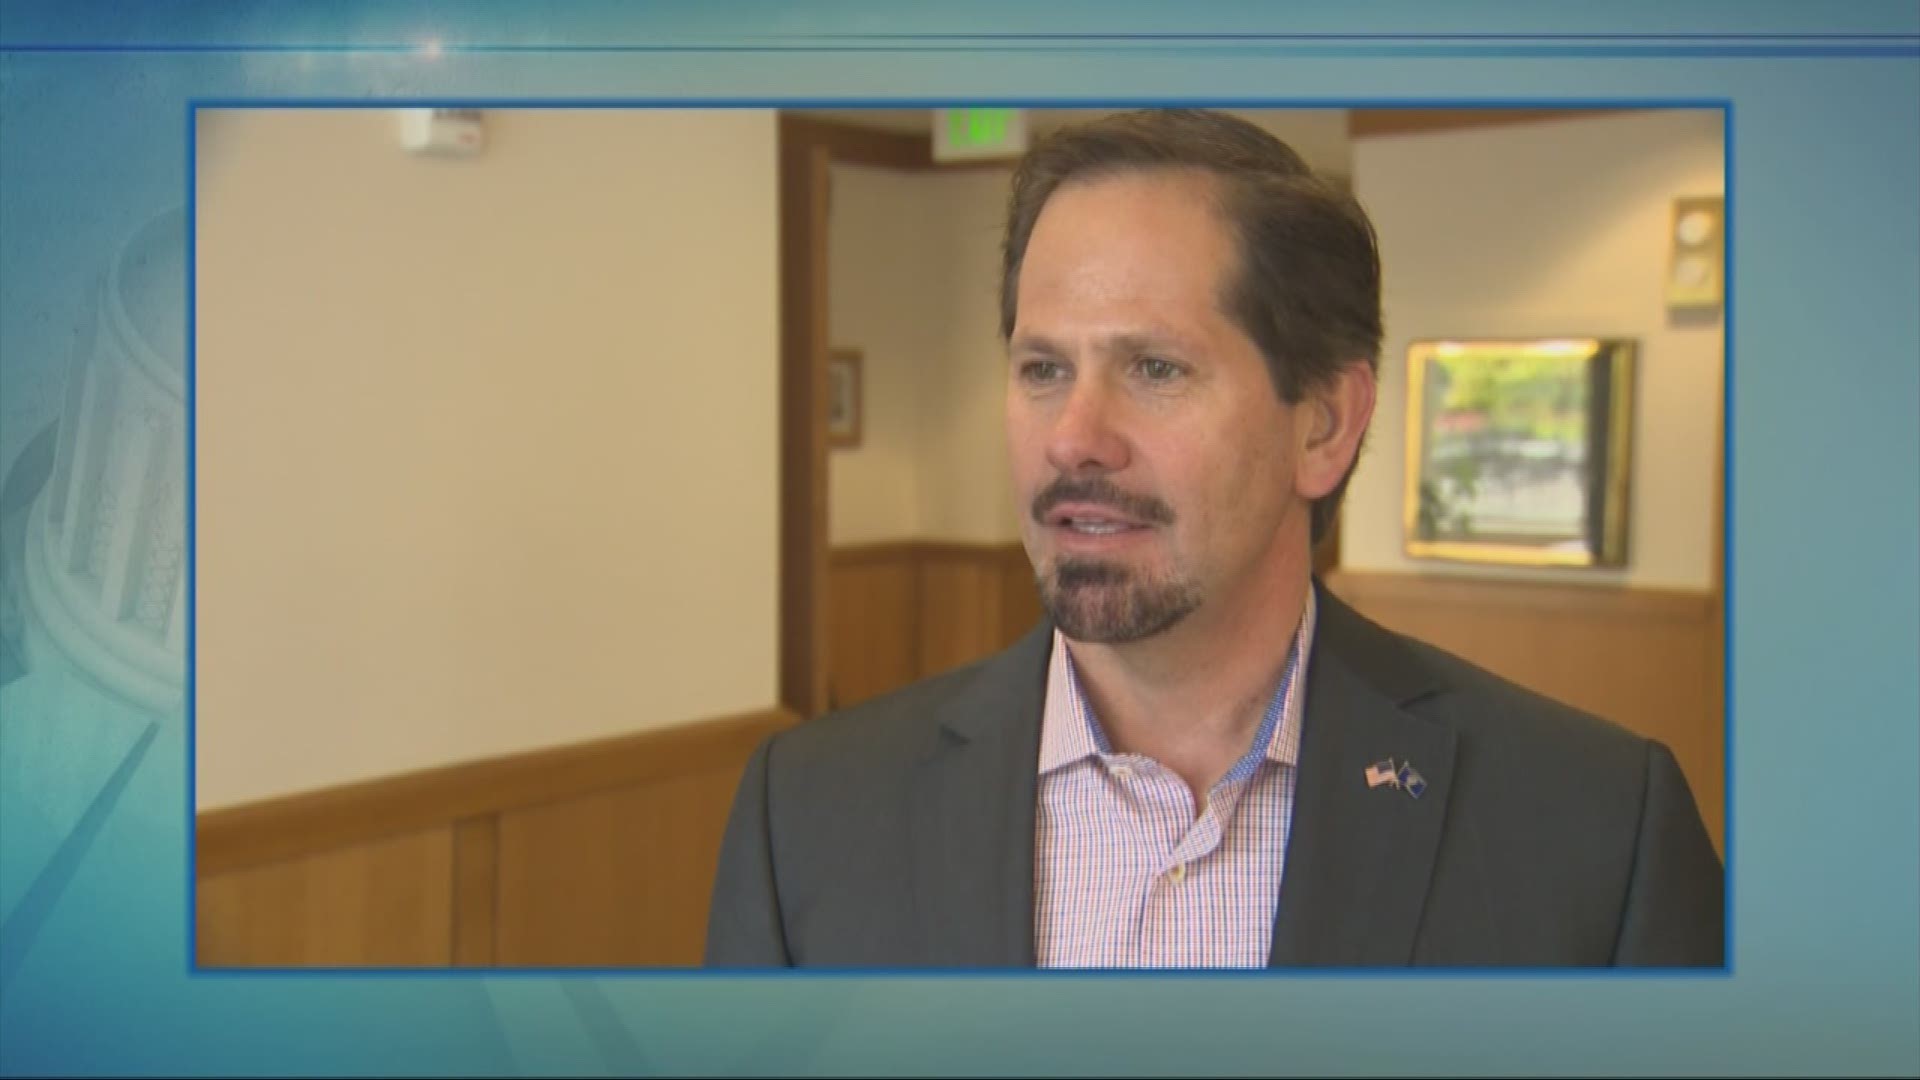 Republican candidate for governor and representative Knute Buehler speaks with Laural Porter about policies he thinks will help Oregon.